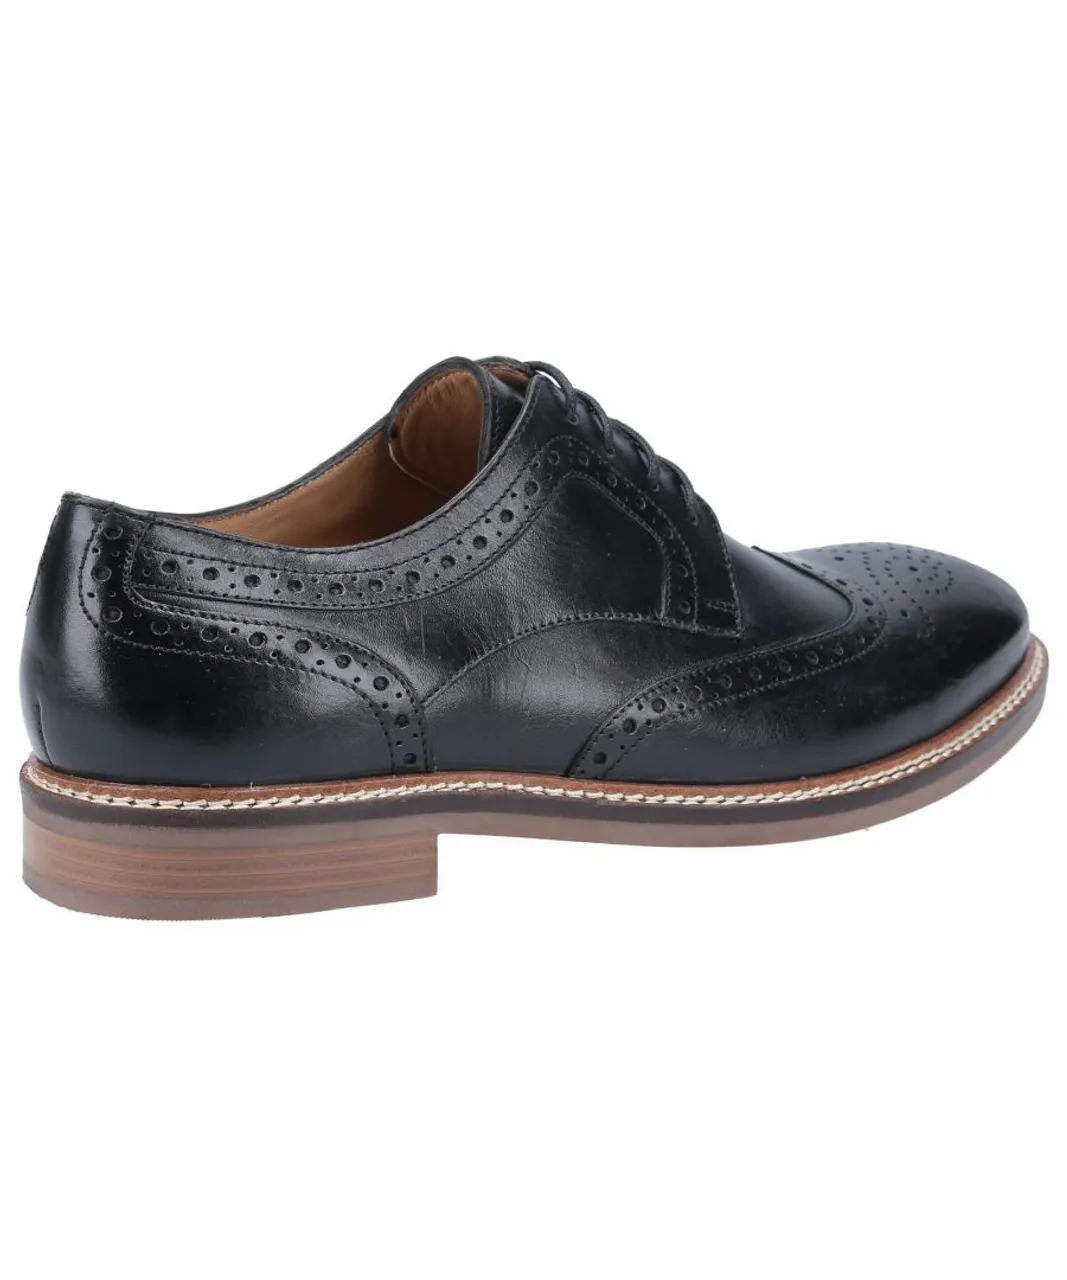 Hush Puppies Bryson Mens Lace Shoes - Black Leather